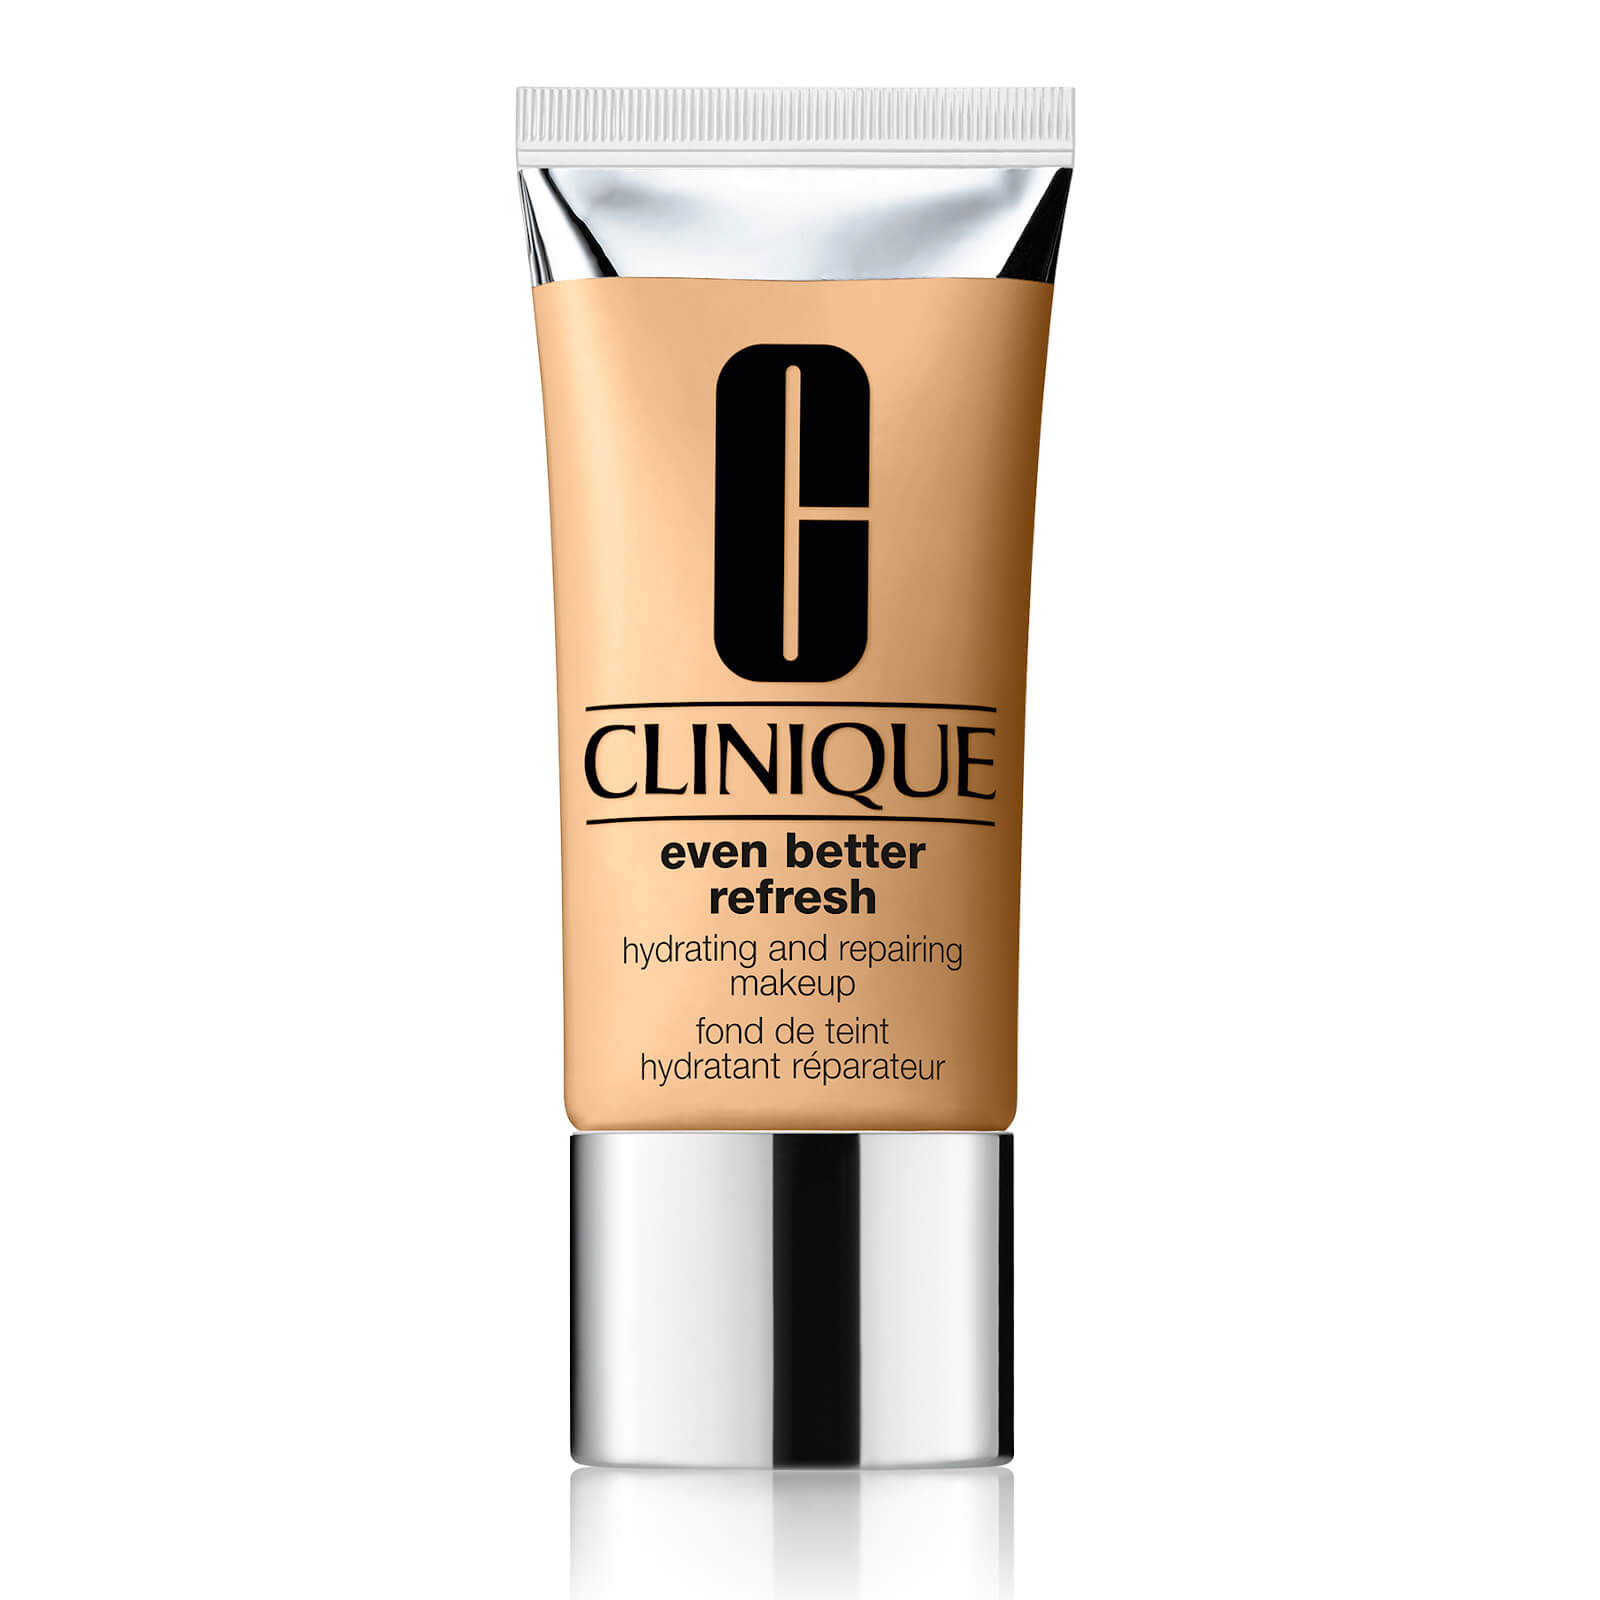 Clinique Even Better Refresh Hydrating and Repairing Makeup 30ml (Various Shades) - WN 46 Golden Neutral